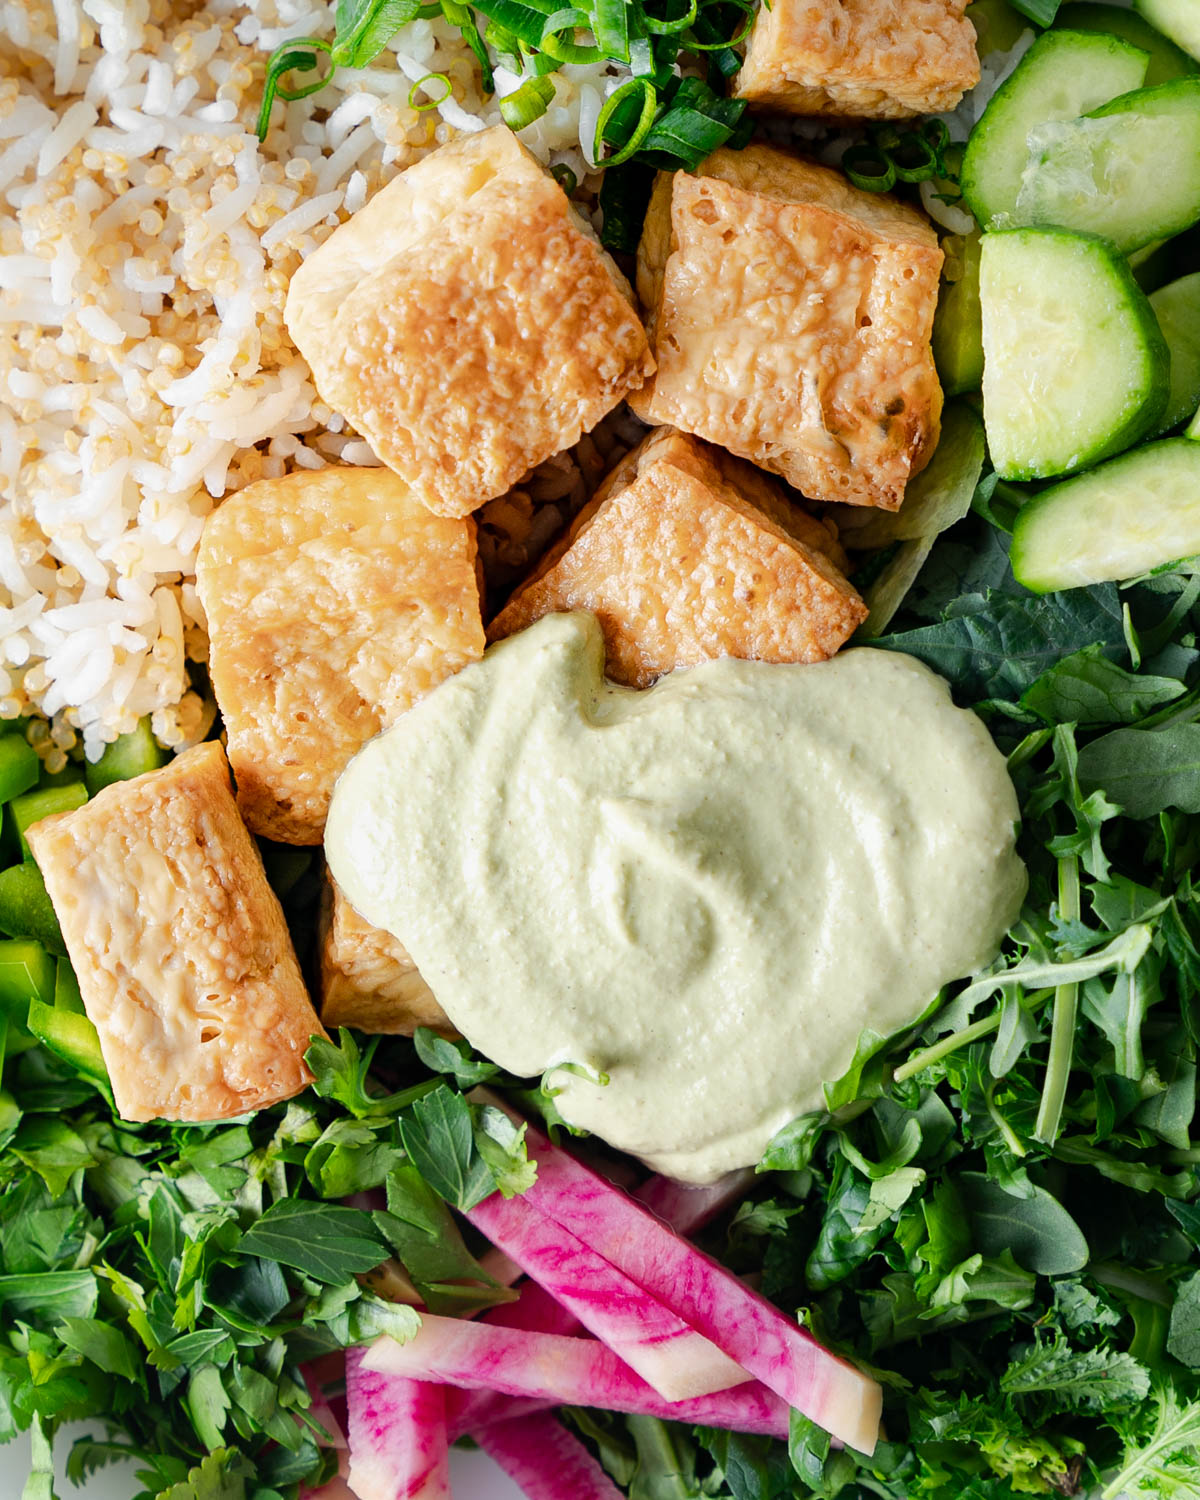 close up of baked tofu, rice and quinoa, cucumbers, chopped herbs, green pepper, watermelon rasdish sticks, and salad greens in a bowl as a salad. Topped with Creamy cashew dressing.